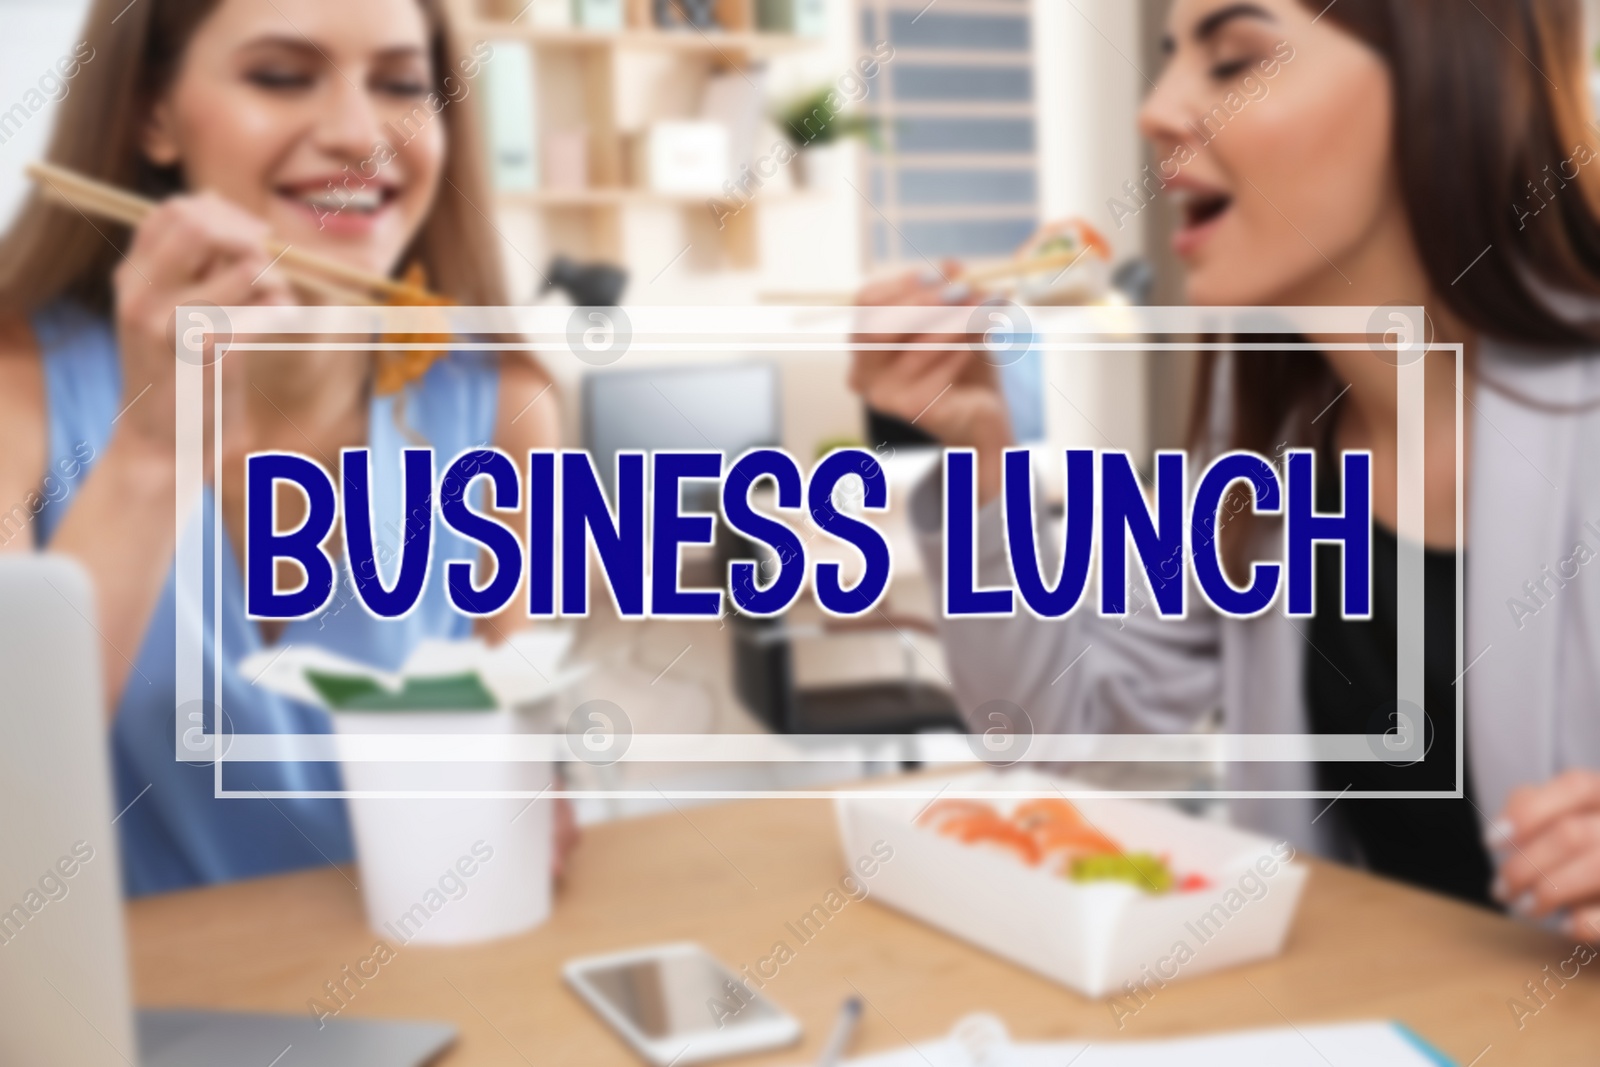 Image of Office employees eating at workplace. Business lunch